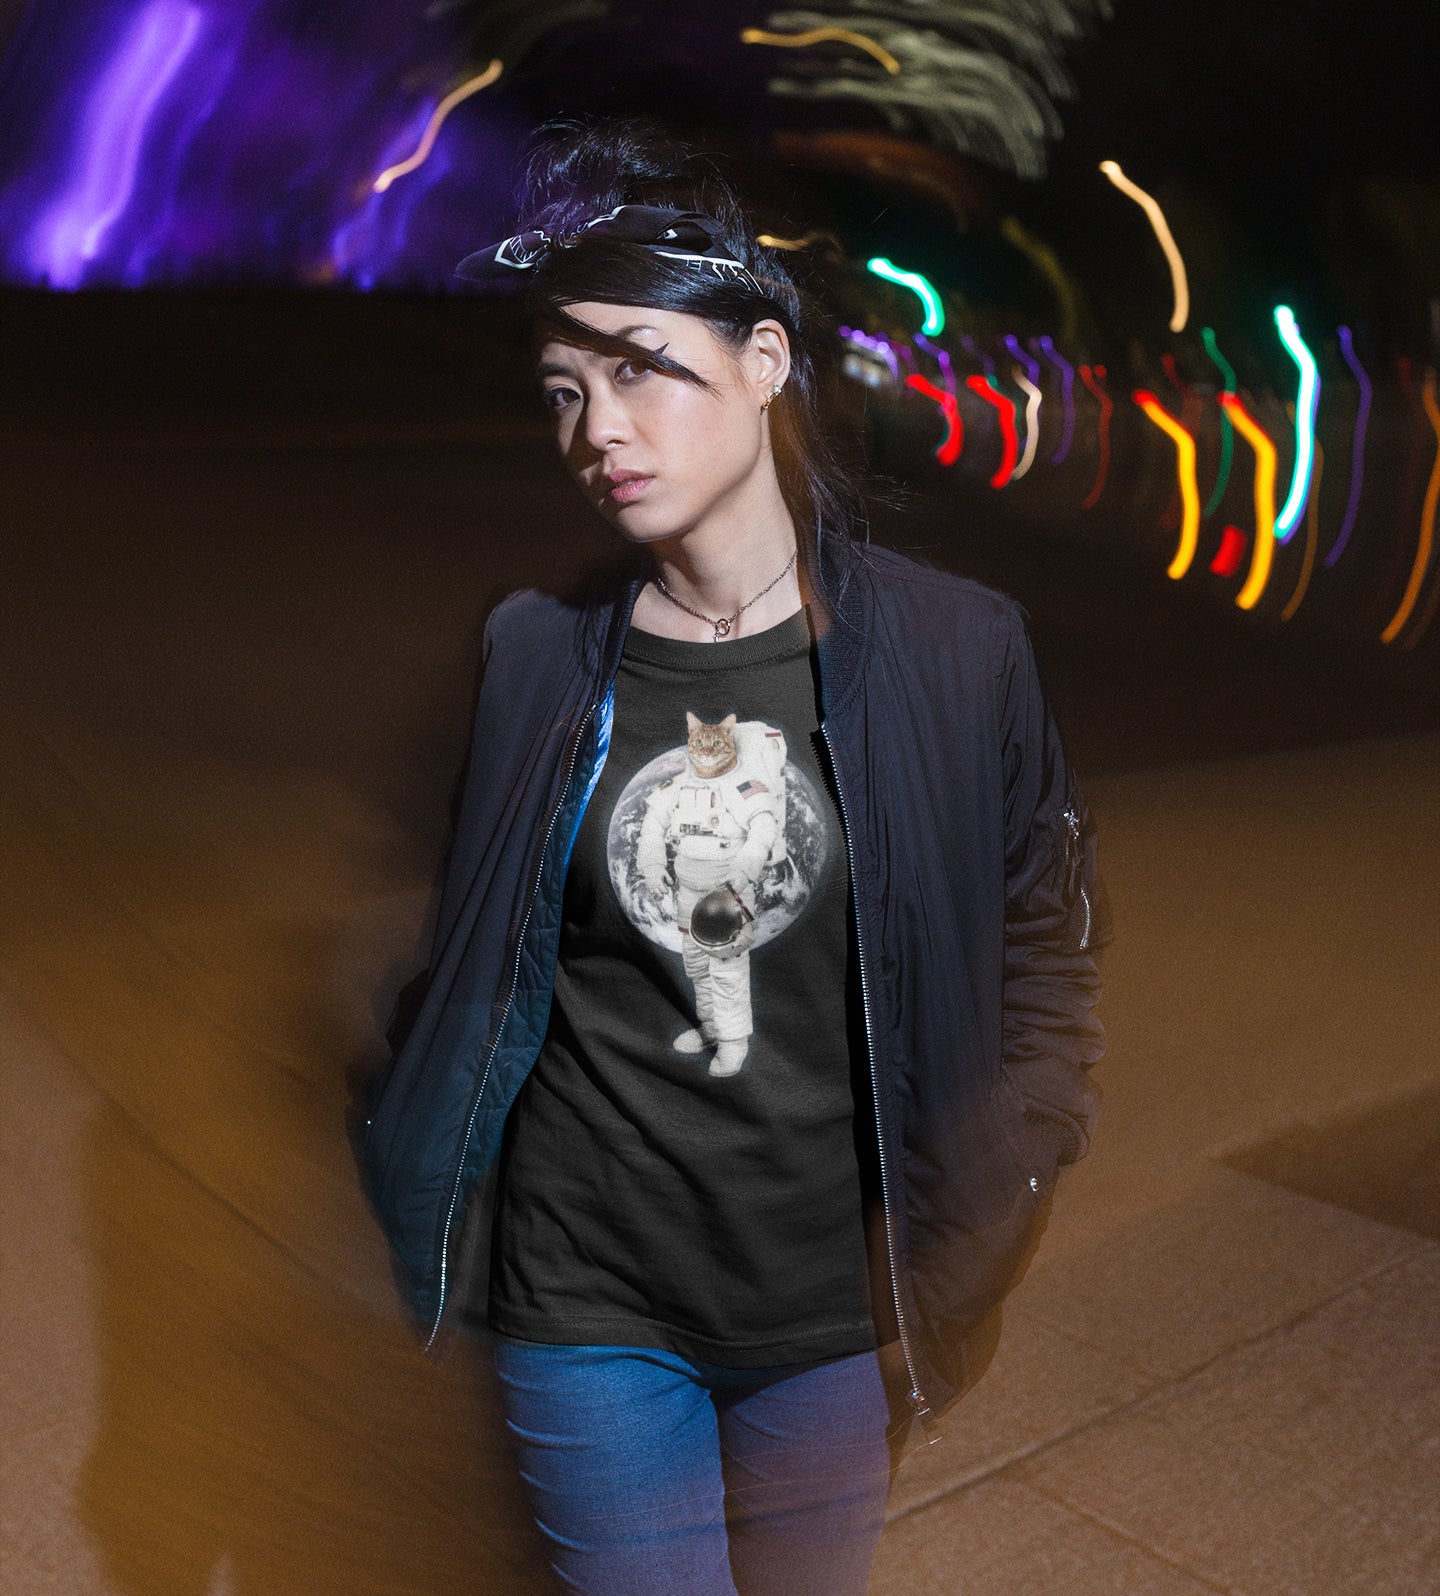 Astro Cat II Unisex T-Shirt by Sexy Hackers